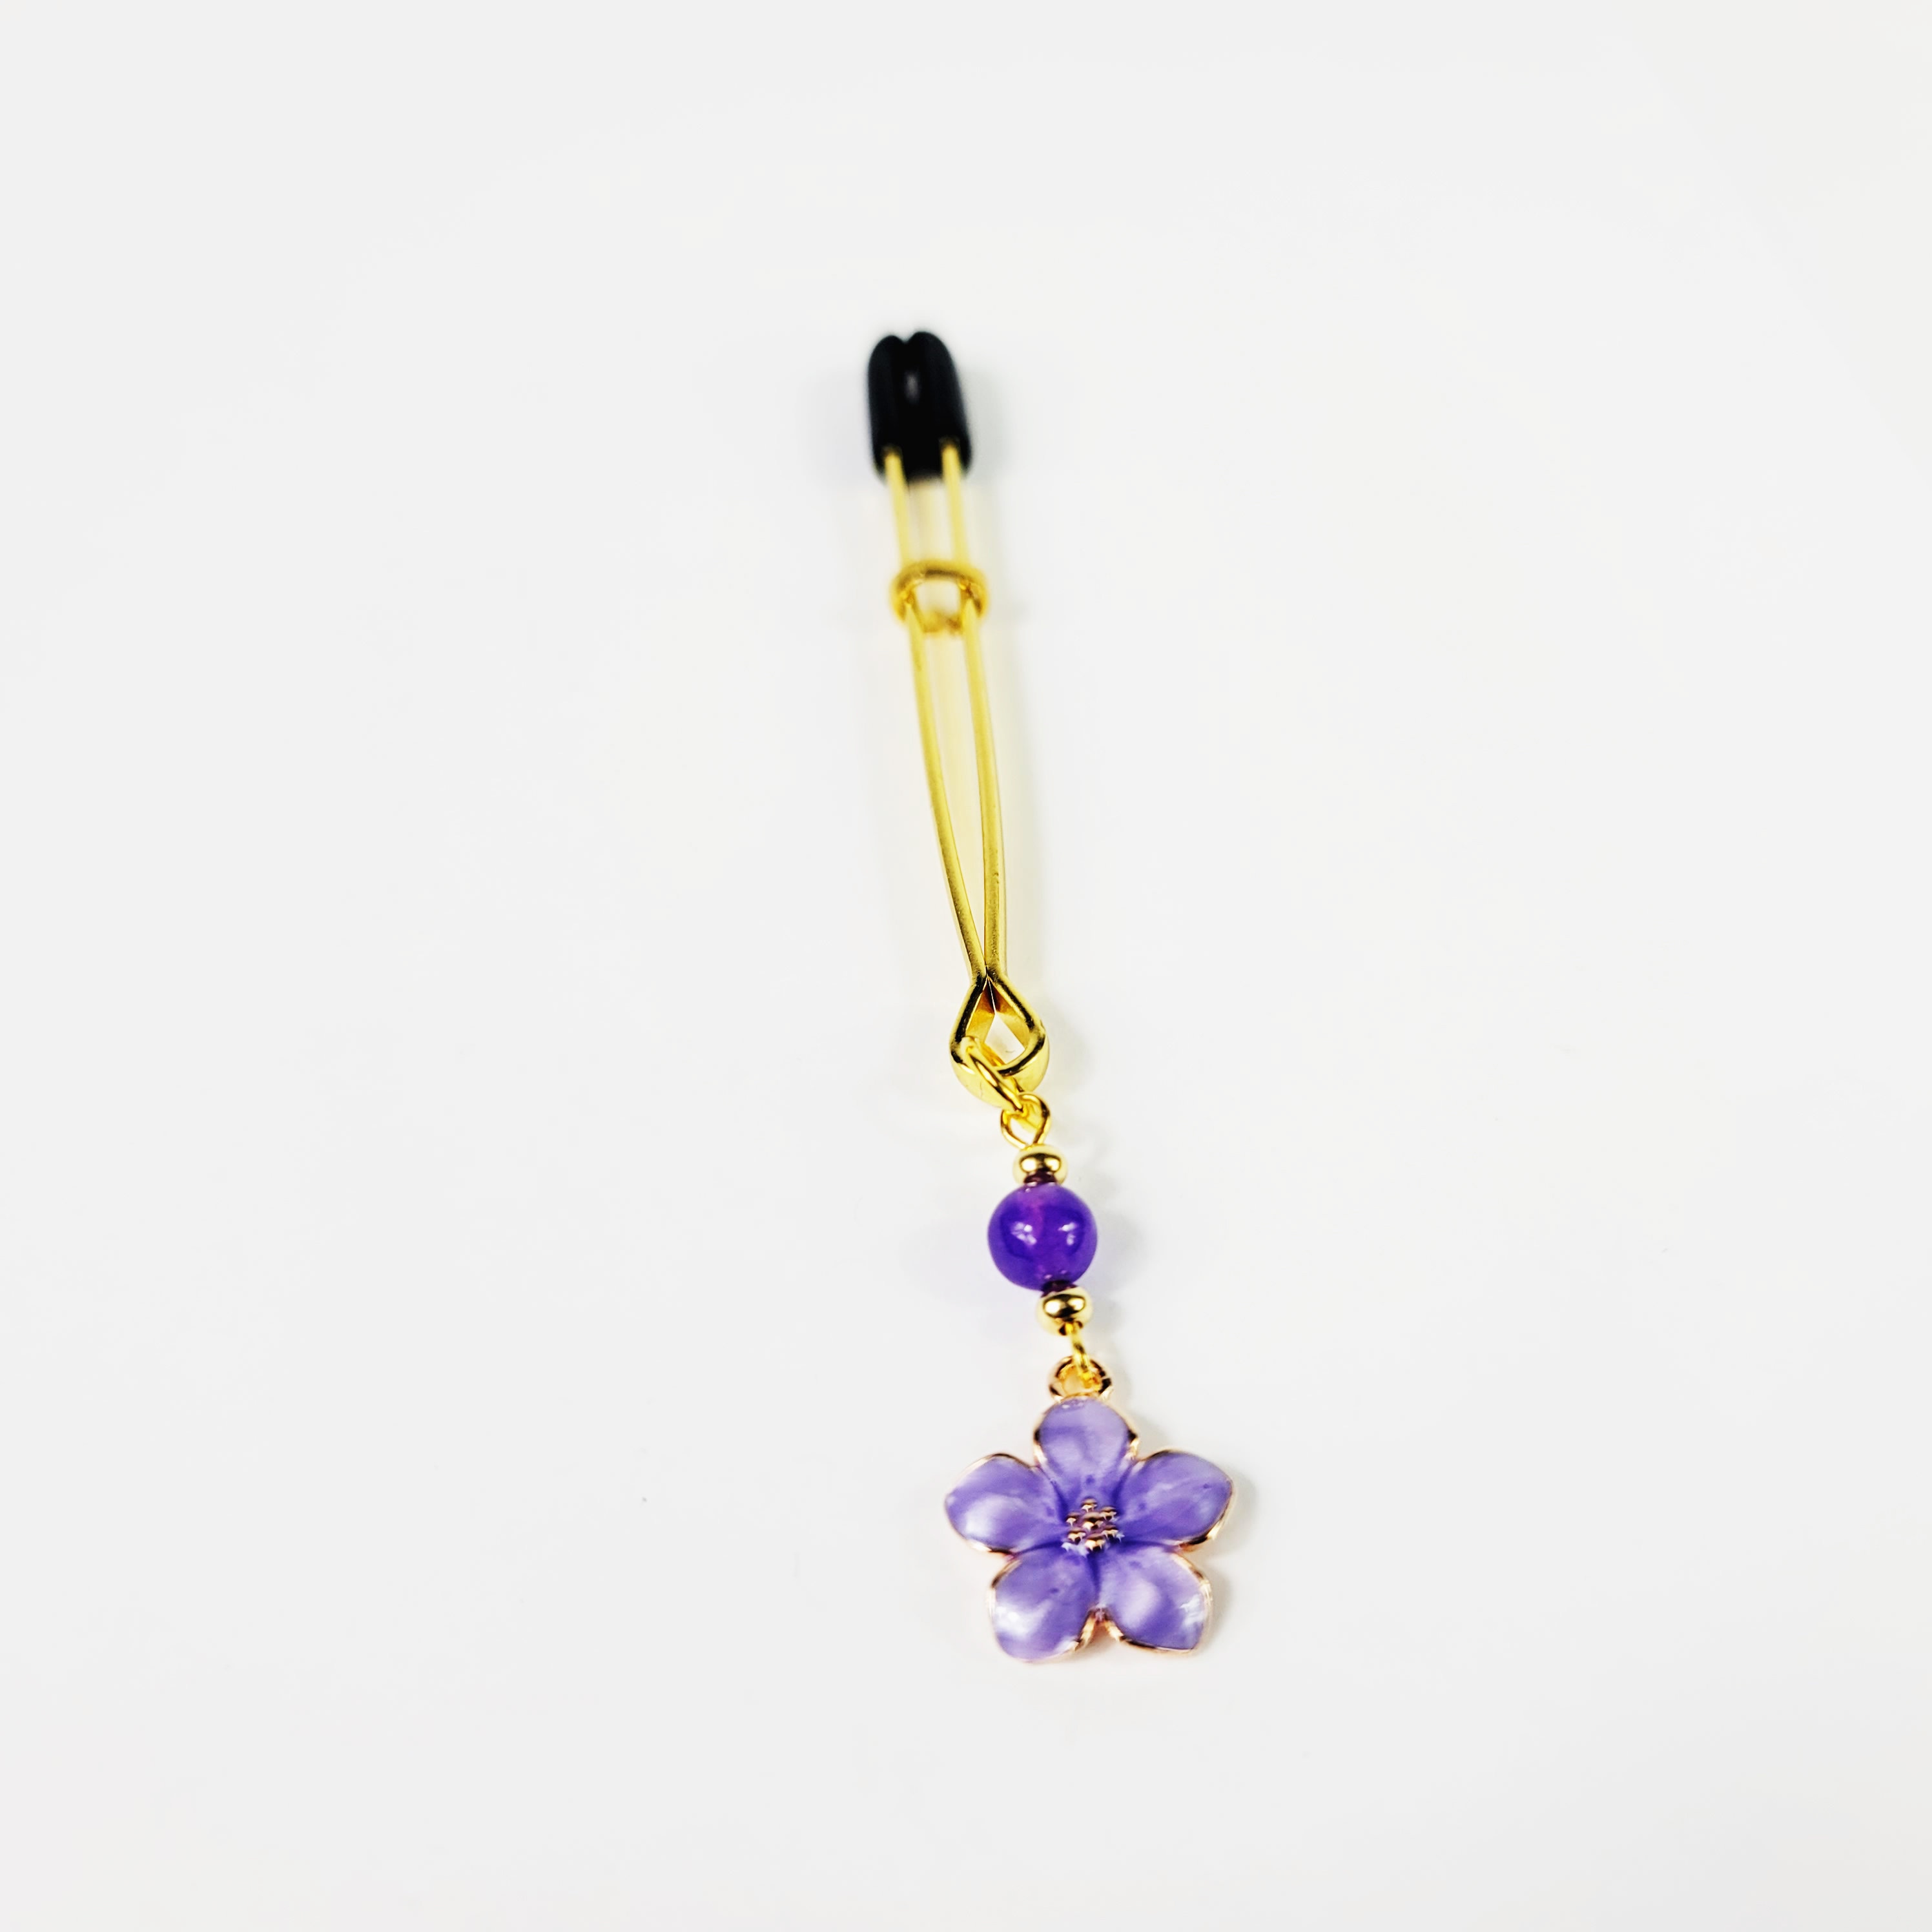 Tweezer Clit Clamp, Gold with Purple Flower and Agate Stone. BDSM Sex Toy for Submissive Women, MATURE photo